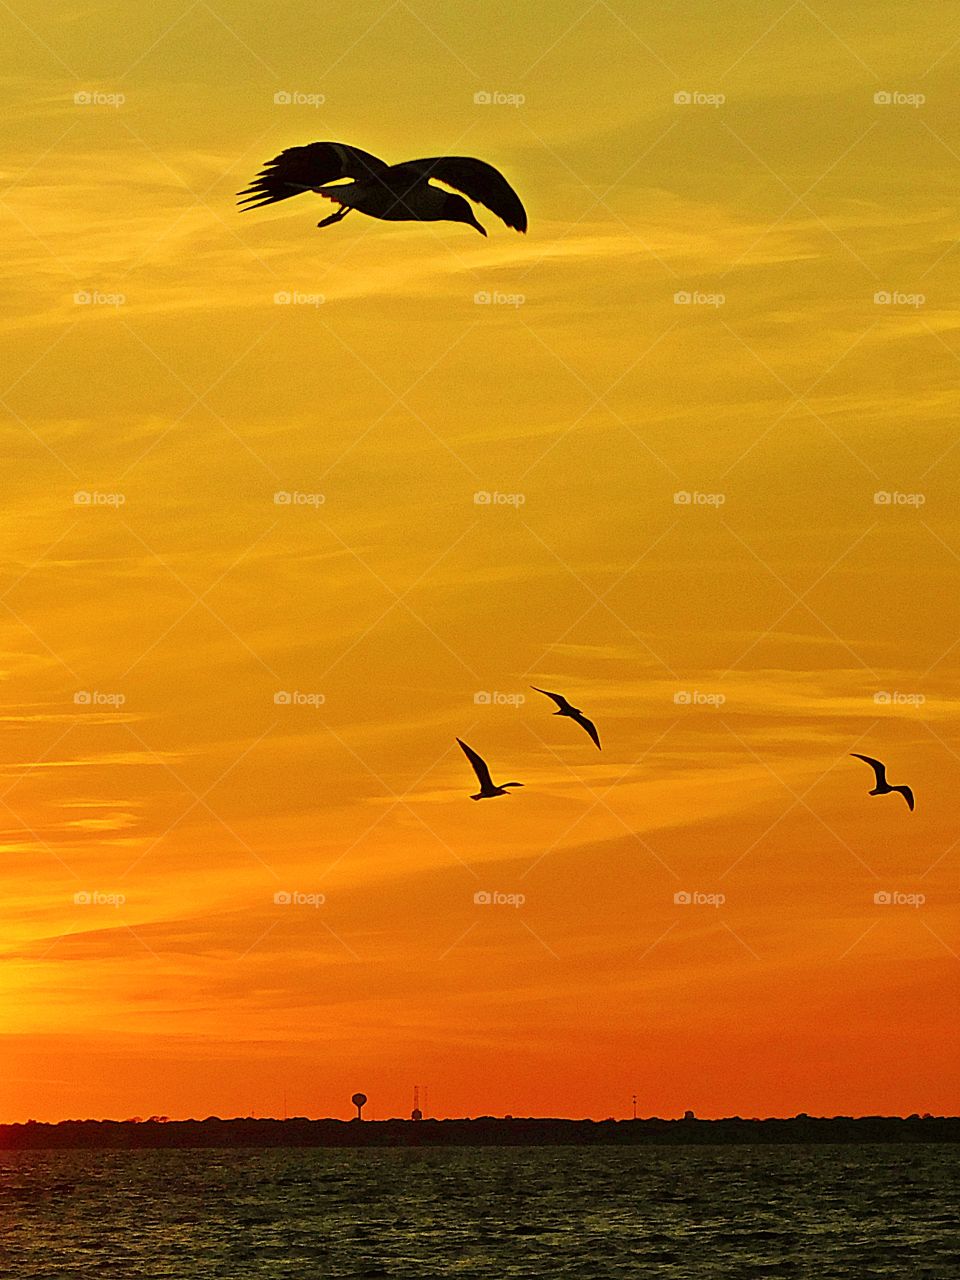 Free as a bird in the marvelous sunset - Seagulls dart in and out of the sky gliding through the shimmering golden orange sunset.